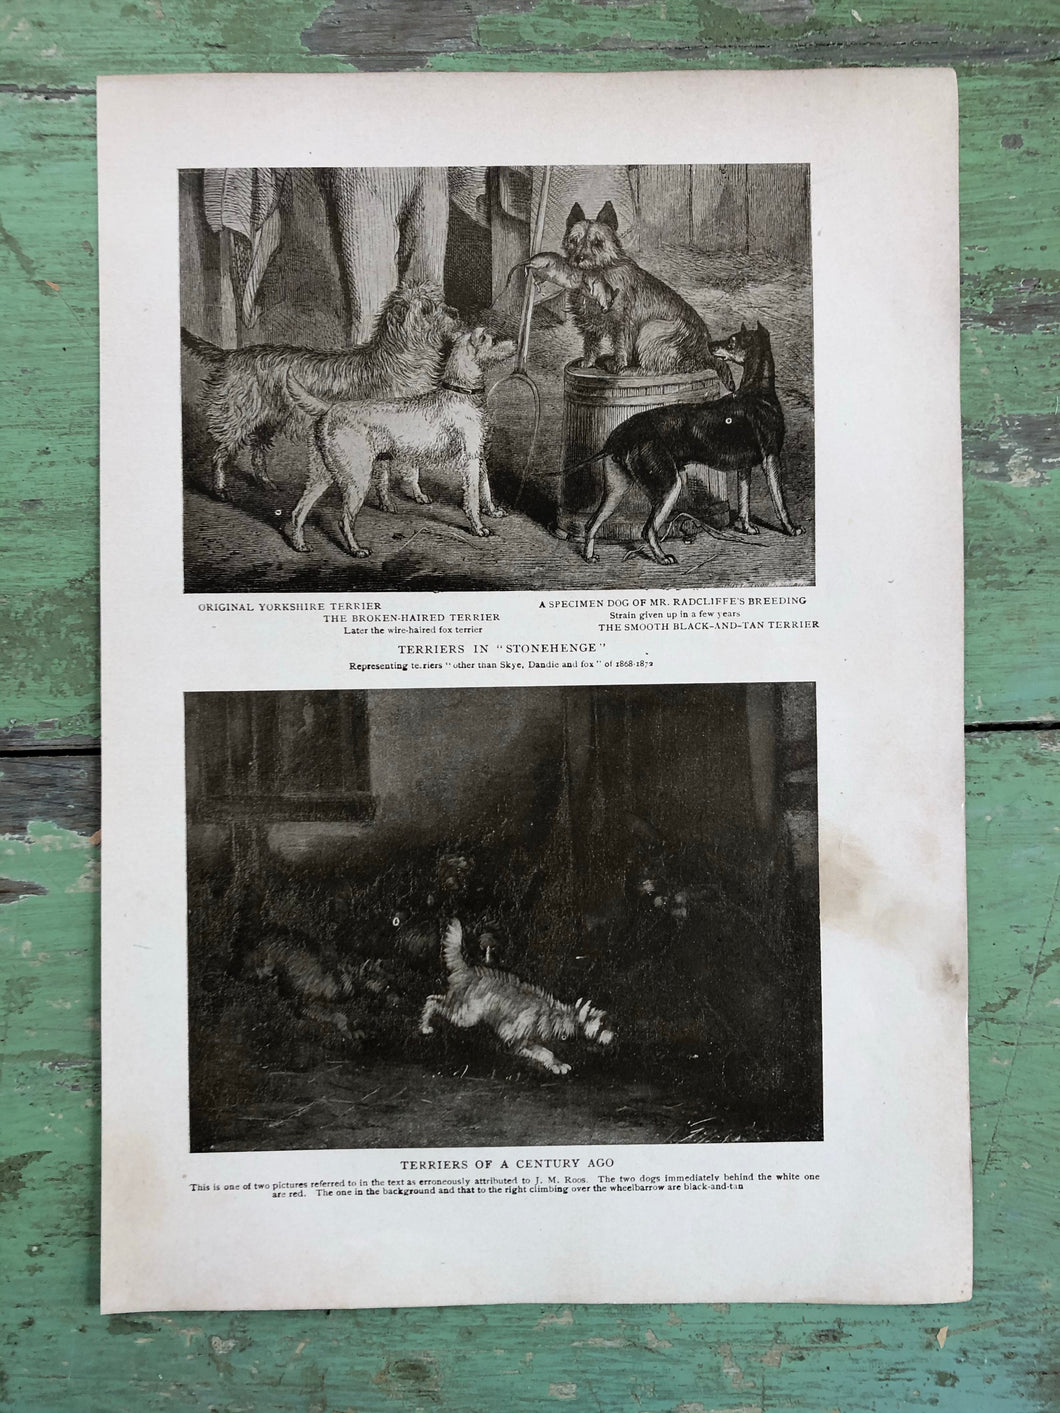 Print from “The Dog Book” by James Watson